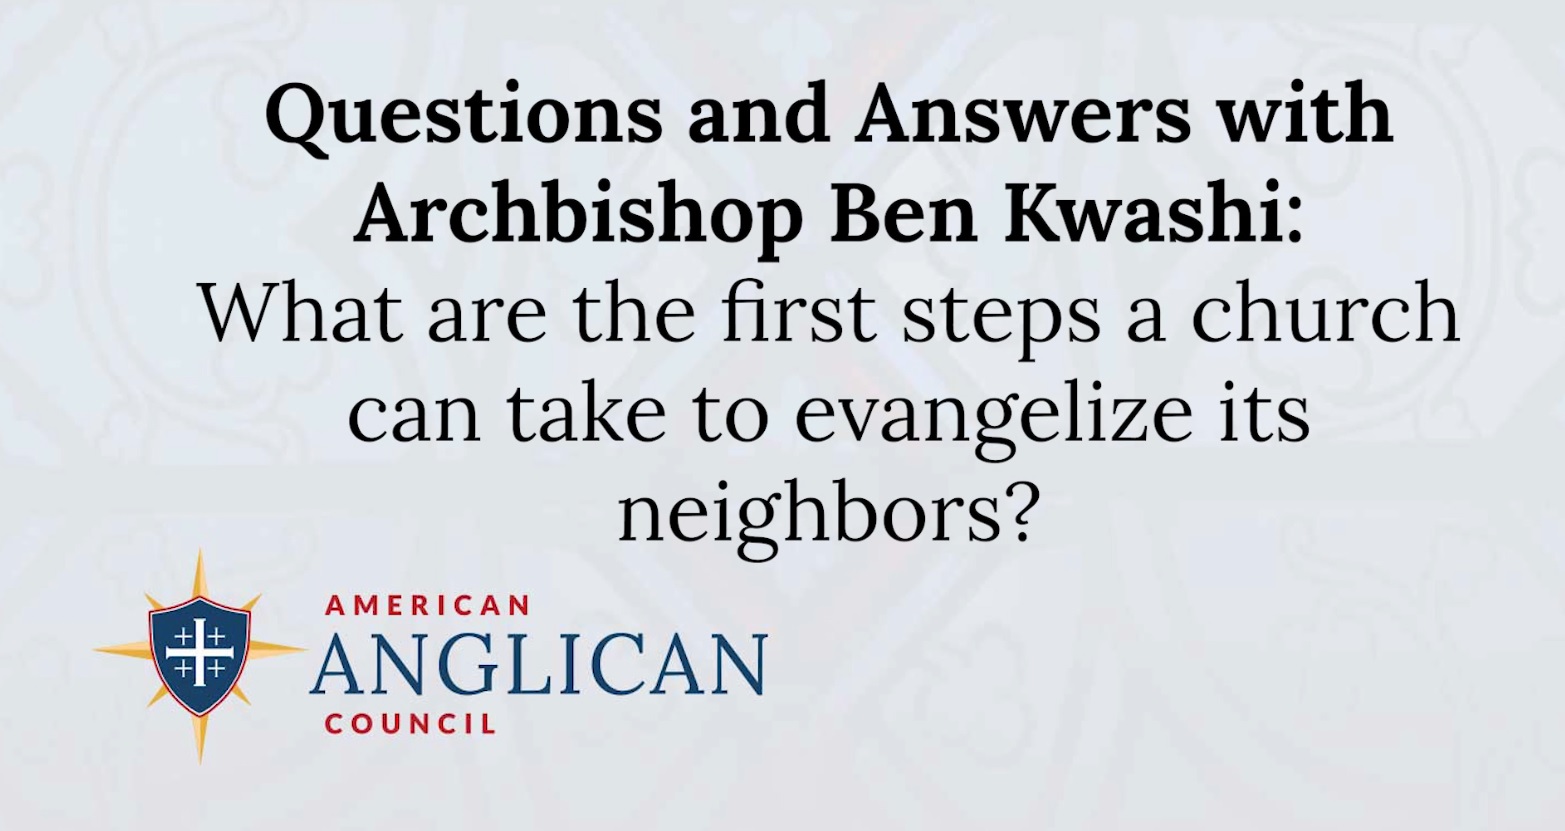 “Evangelism?  You’ve got to be kidding!  At our age and church size, where would we even begin?” 